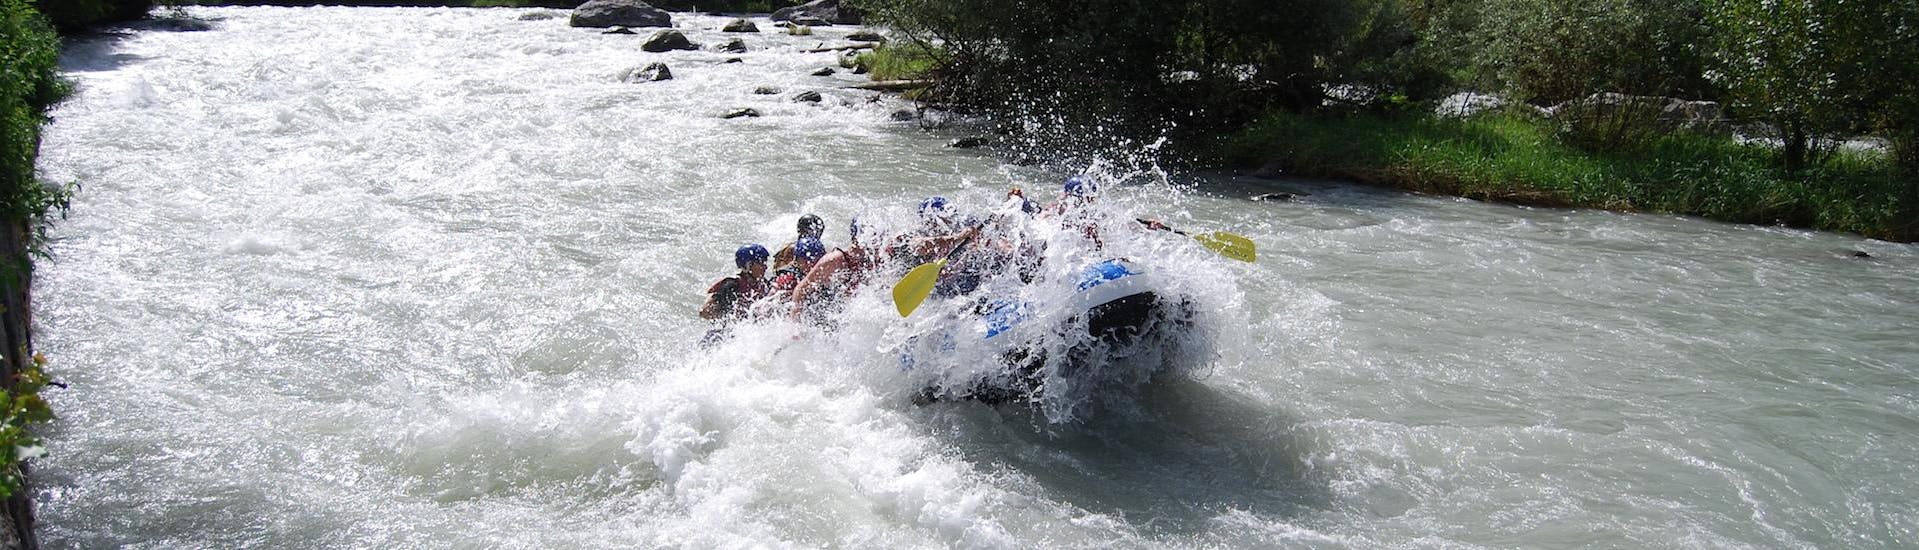 Group of participants having fun during the rafting on the Adda River - Adrenaline with Indomita Valtellina River.